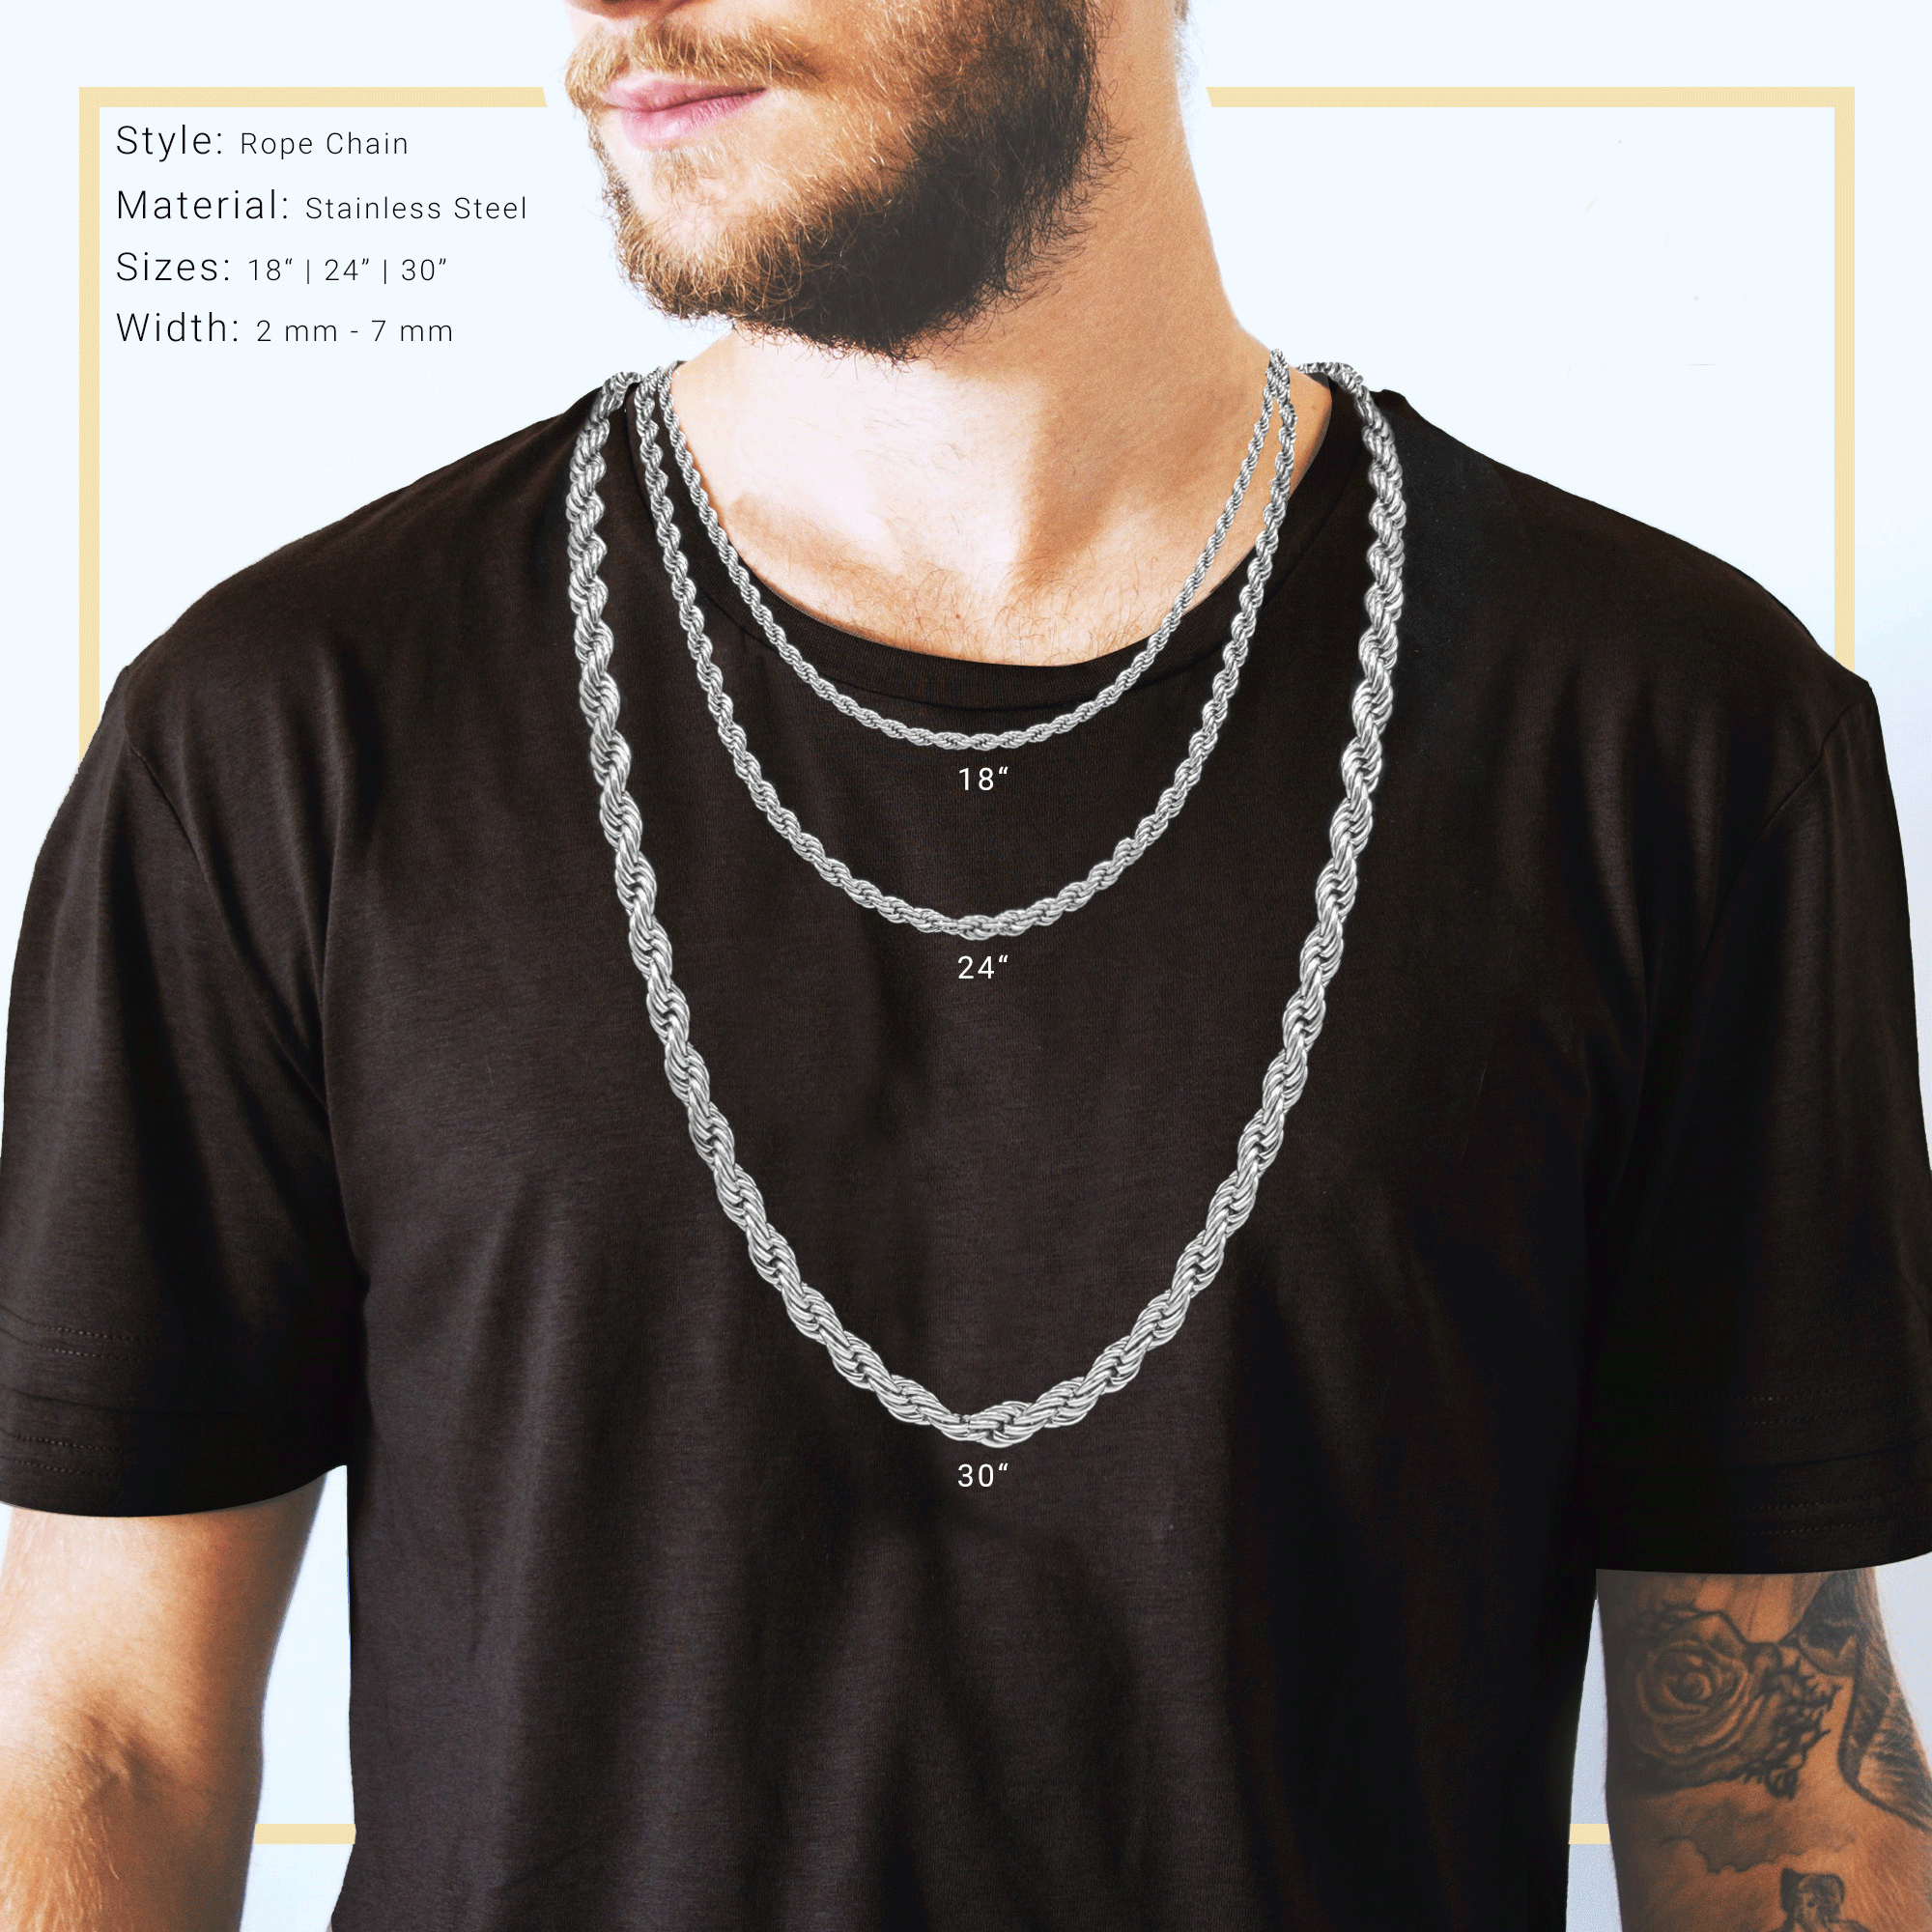 Silver Rope Chain Twisted Link Necklace for Men 18" 20" 24" 30" Length | 2 mm - 7 mm Width